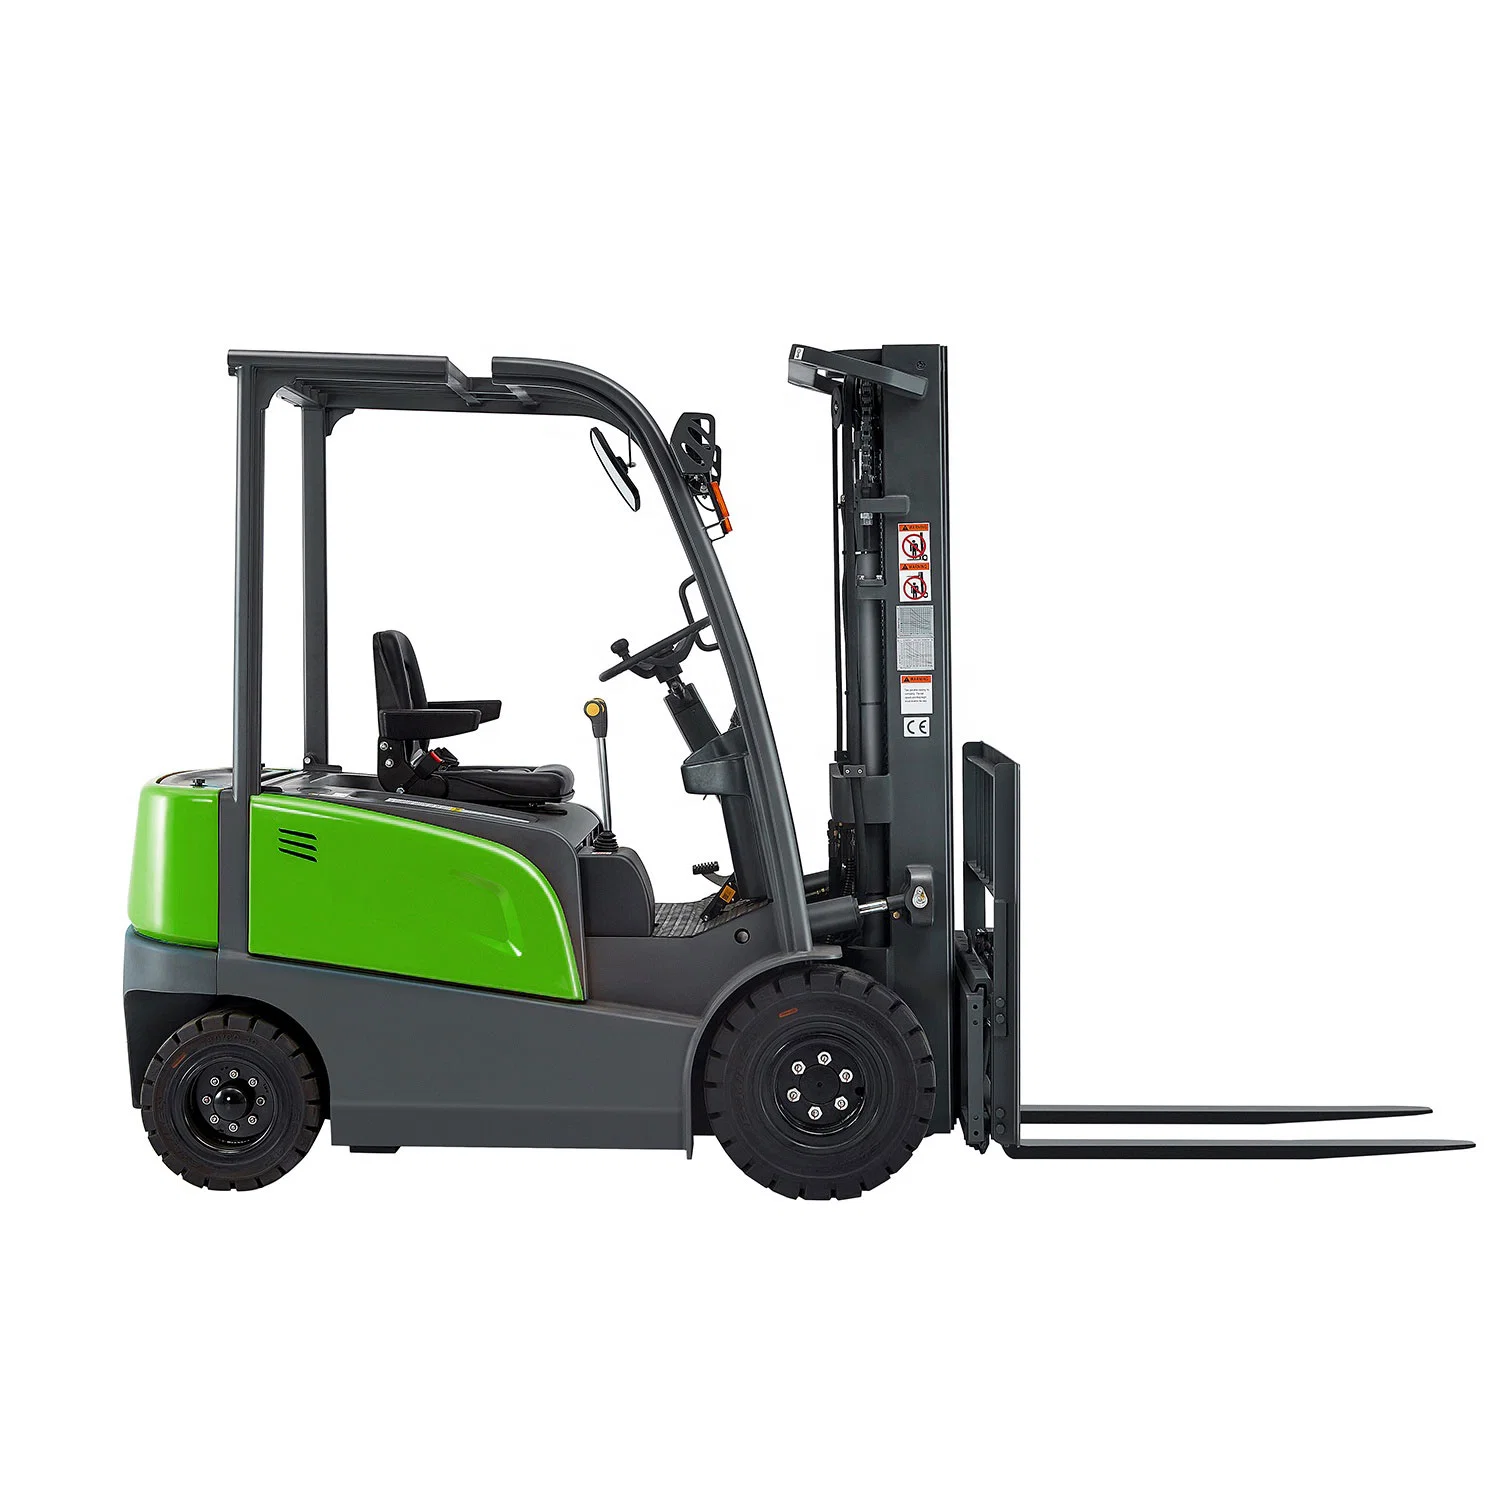 Large Load Capacity 3.5t/Ton 3500kg Dual Controller Design Electric Forklift Used in Warehouse